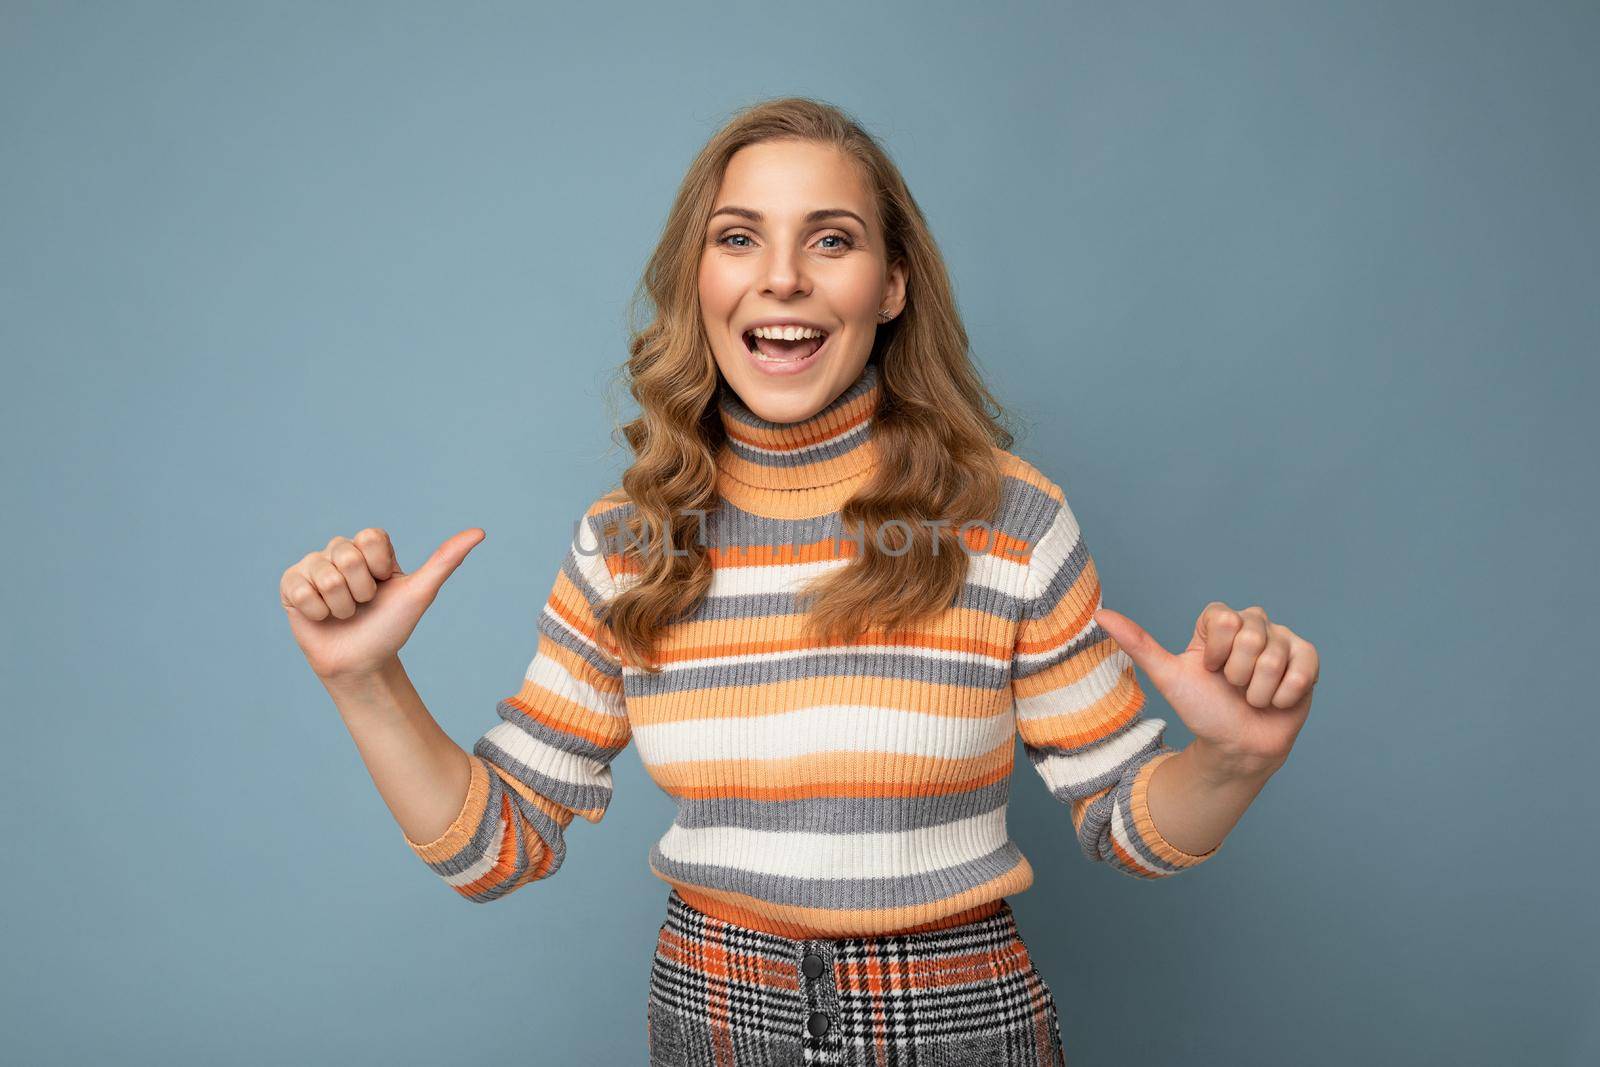 Portrait of young winsome attractive happy smiling blonde woman with wavy-hair wearing striped sweater isolated over blue background with empty space and pointing fingers at herself.